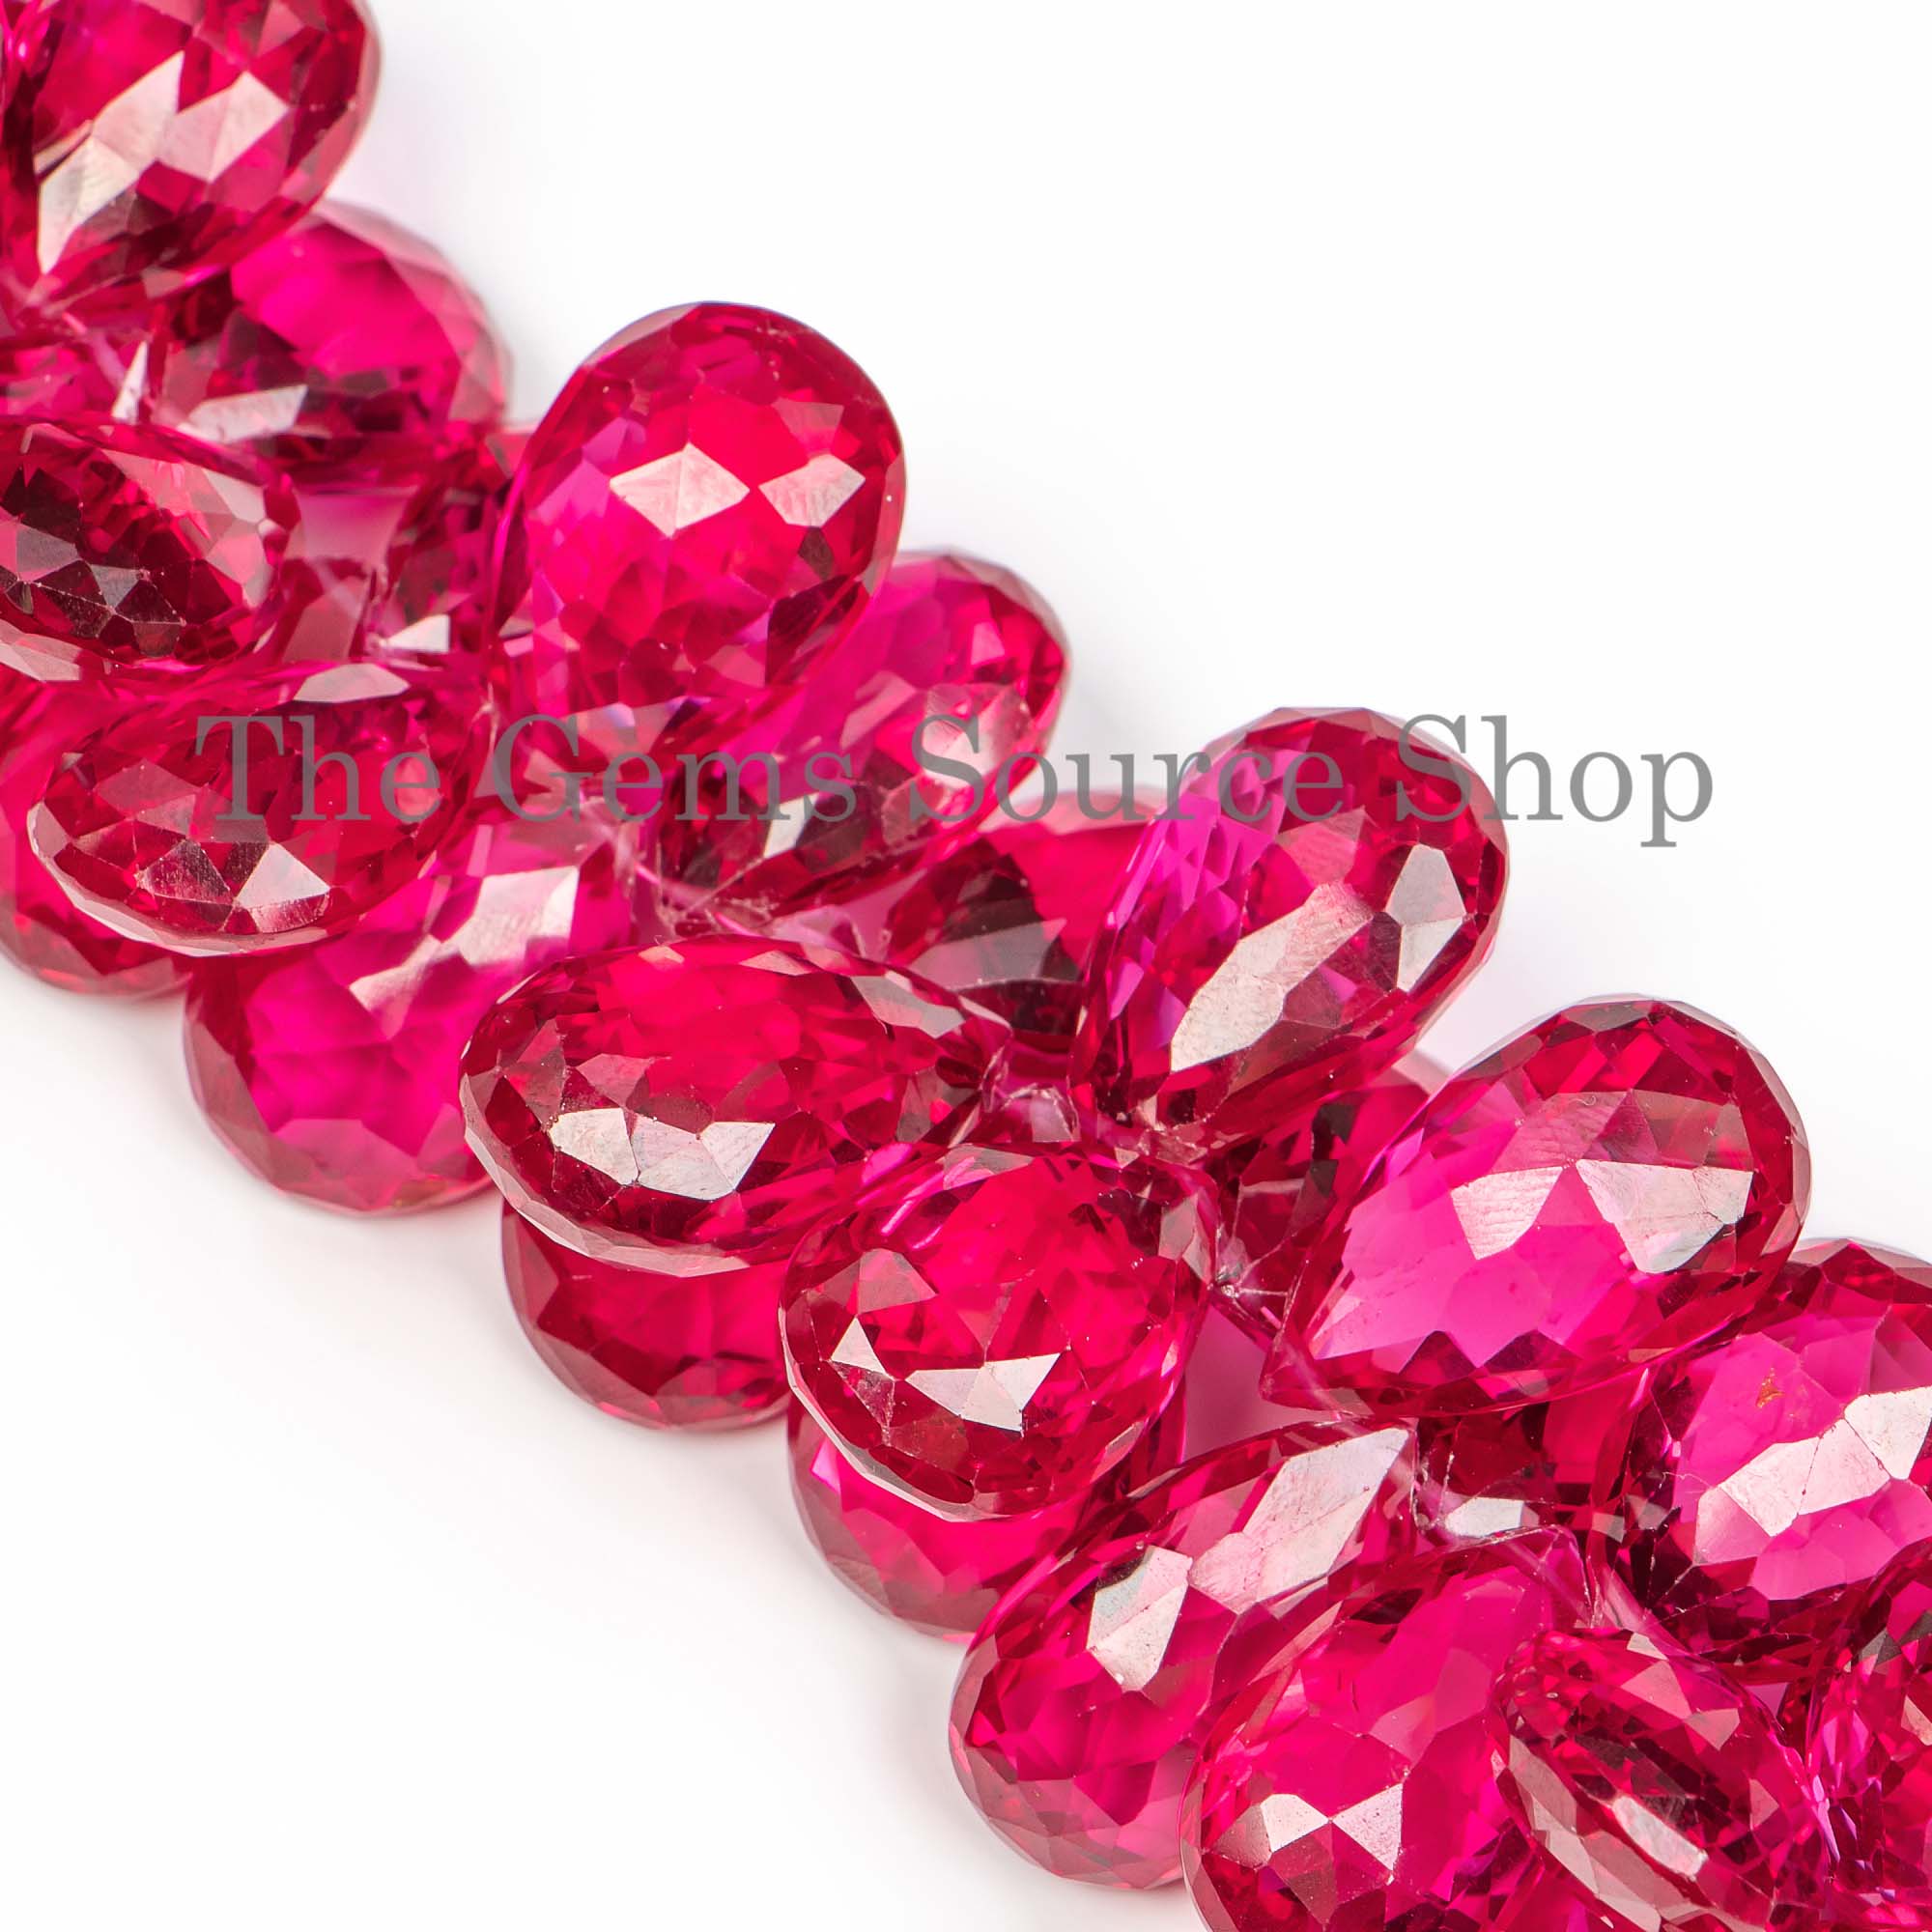 Cubic Zirconia Faceted Beads, Ruby Cubic Zirconia Beads, Cubic Zirconia Pear Beads, Zirconia Faceted Beads